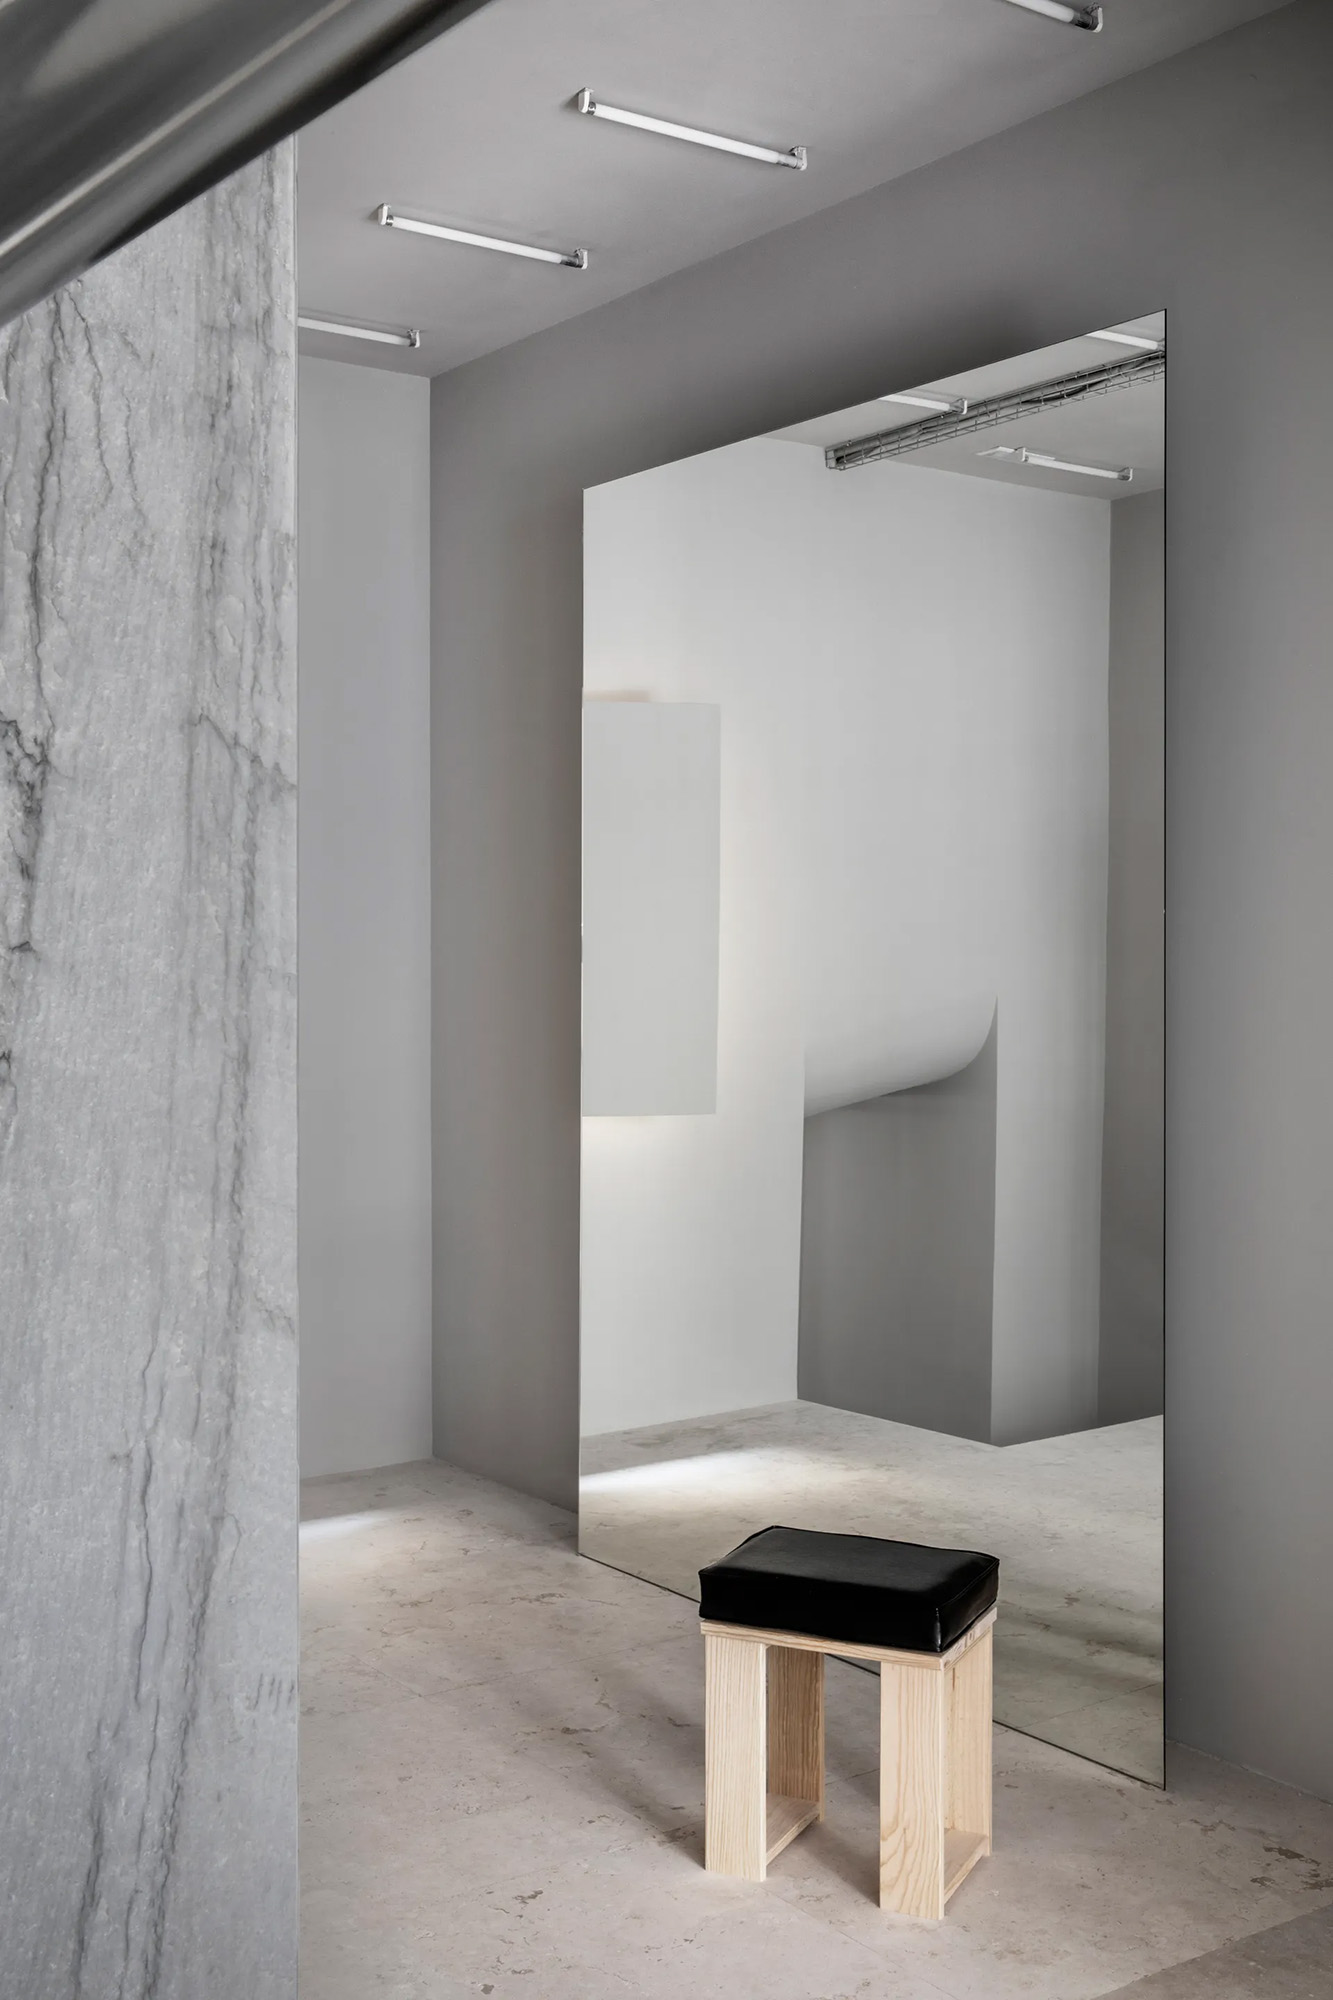 Image of Redondo20Store20SAIZ205 in A monolithic arch in Sensa Platino gives character to a new fashion shop in Madrid - Cosentino